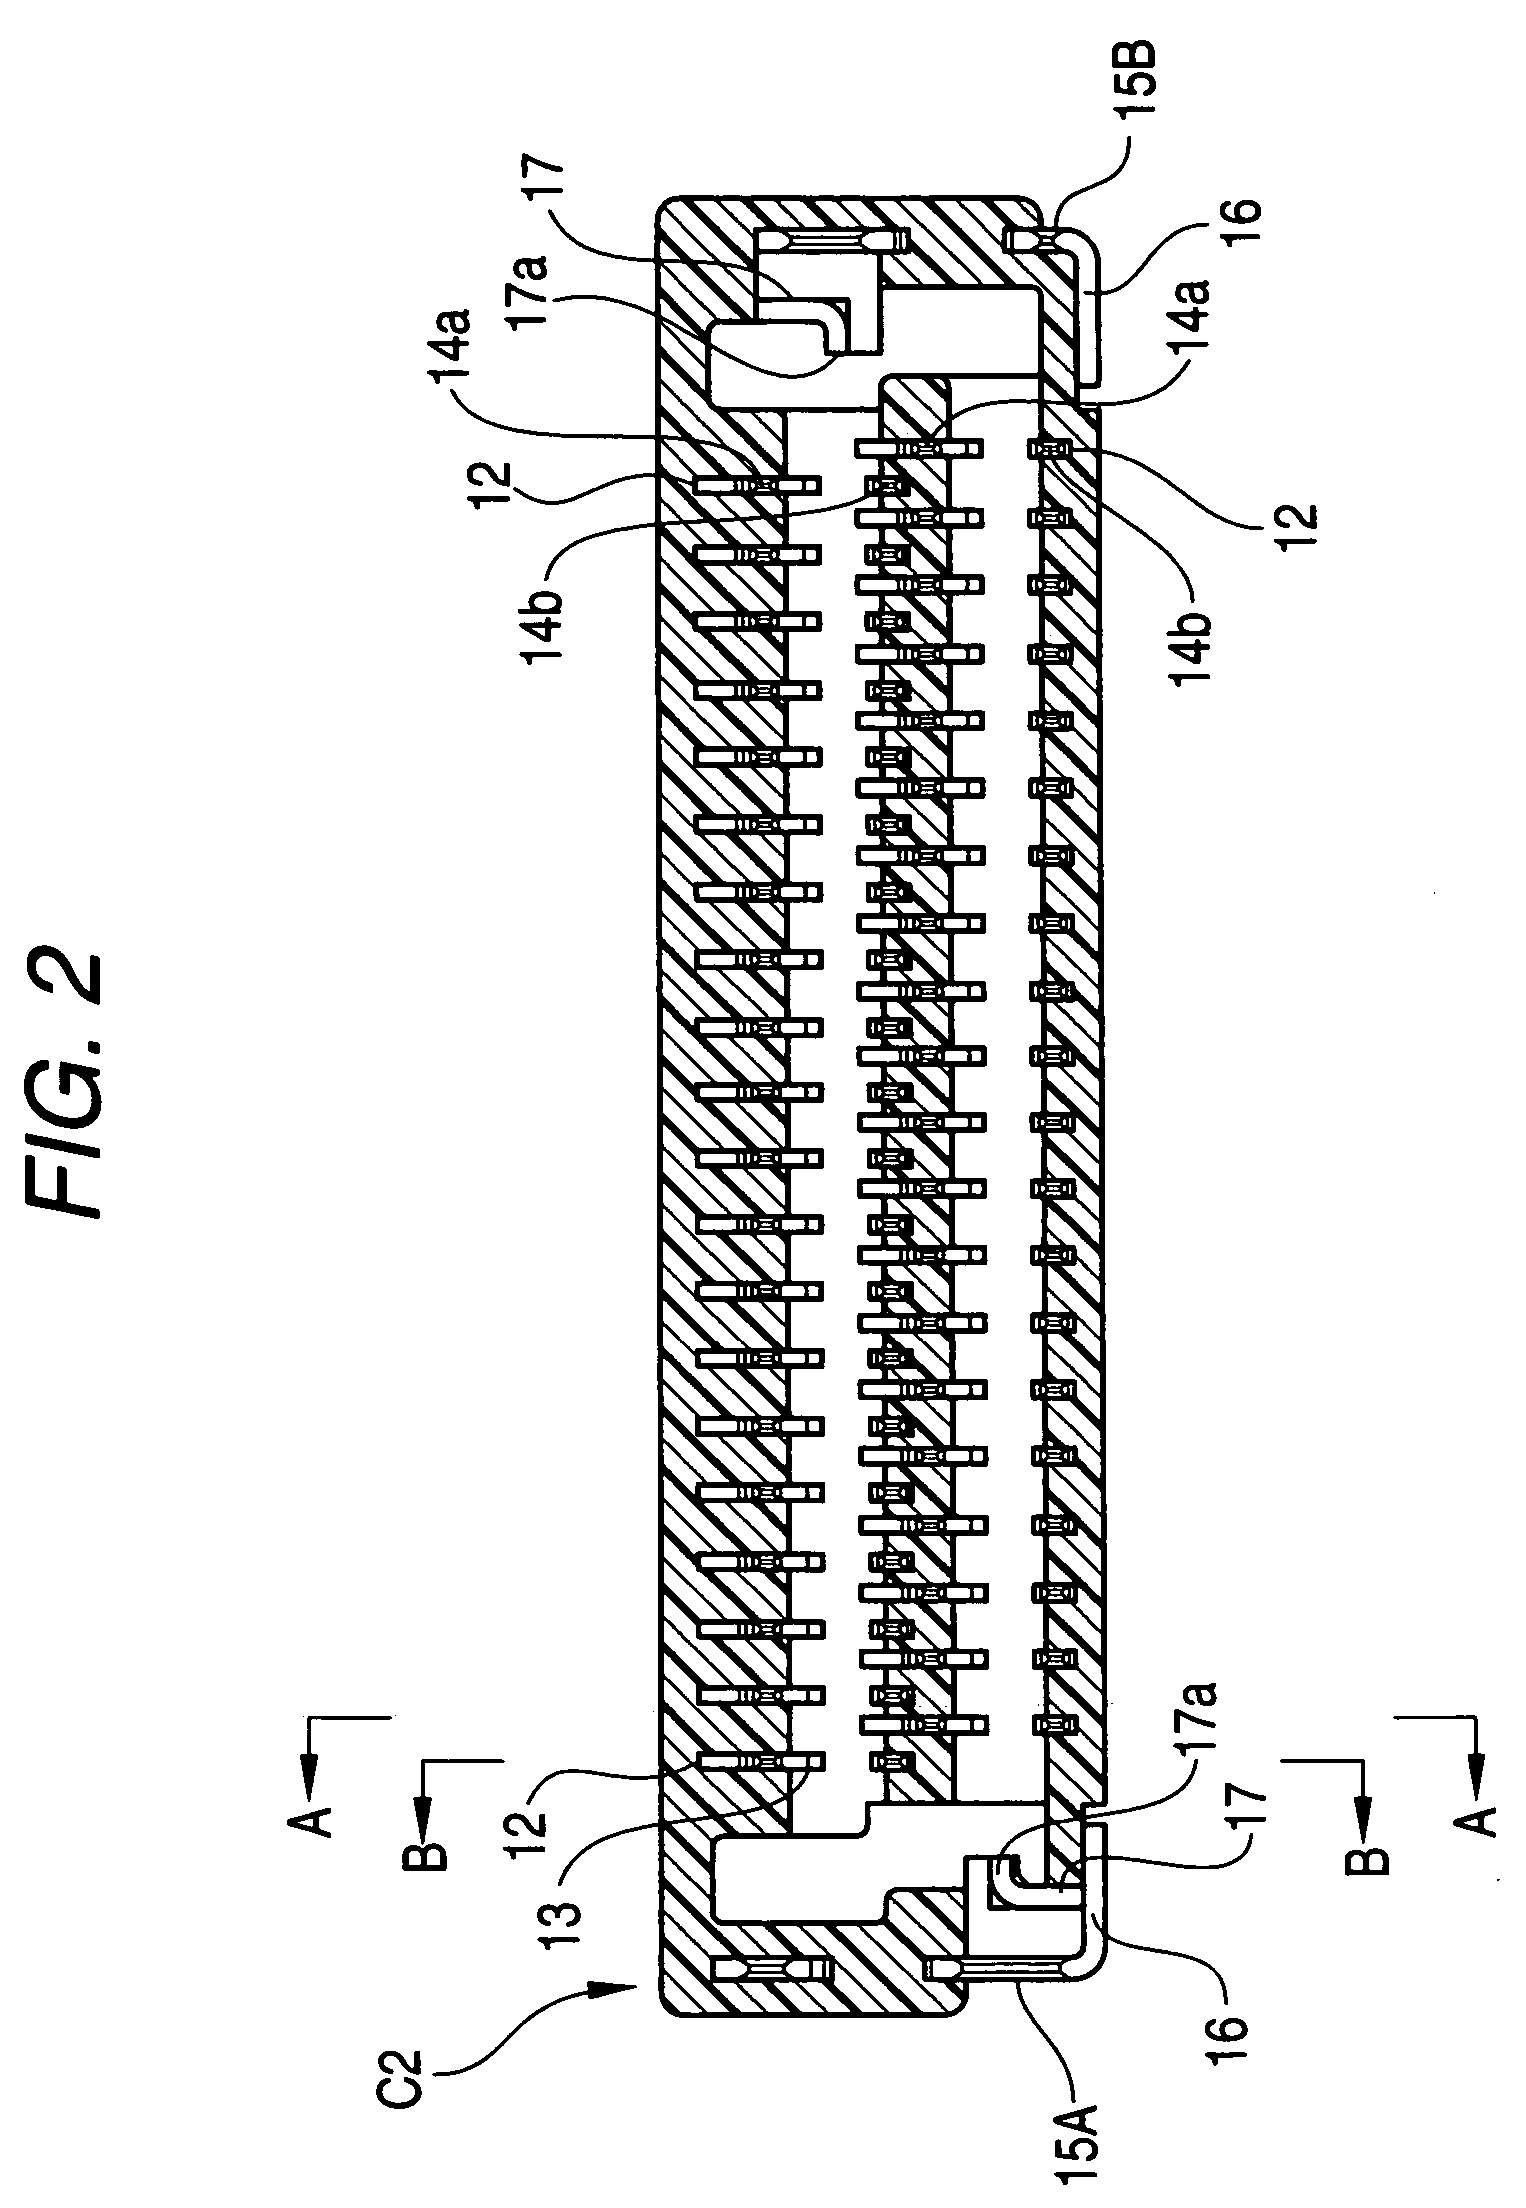 Board mounting type connector with metal fastening member